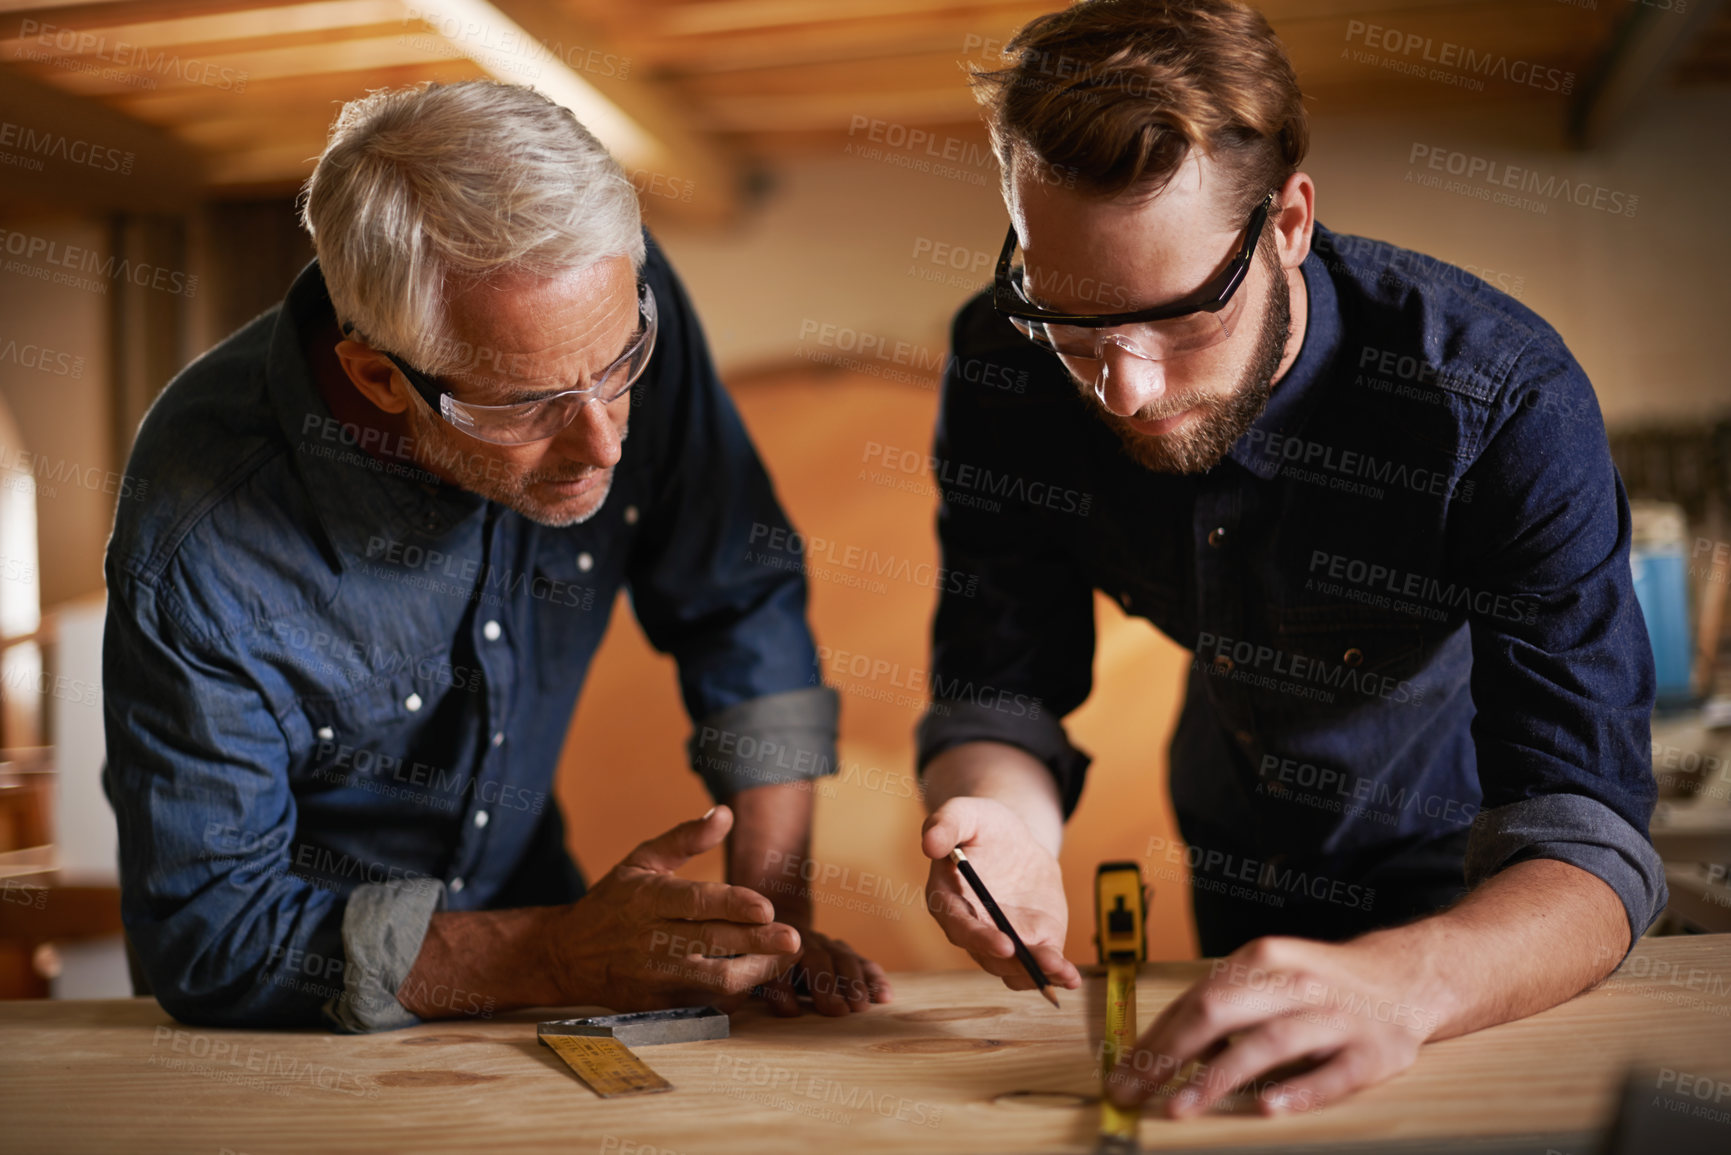 Buy stock photo Carpentry, men and measurement in workshop teaching and learning furniture design, manufacturing or internship. Mentorship, carpenter or apprentice at sustainable wood business or teamwork on project